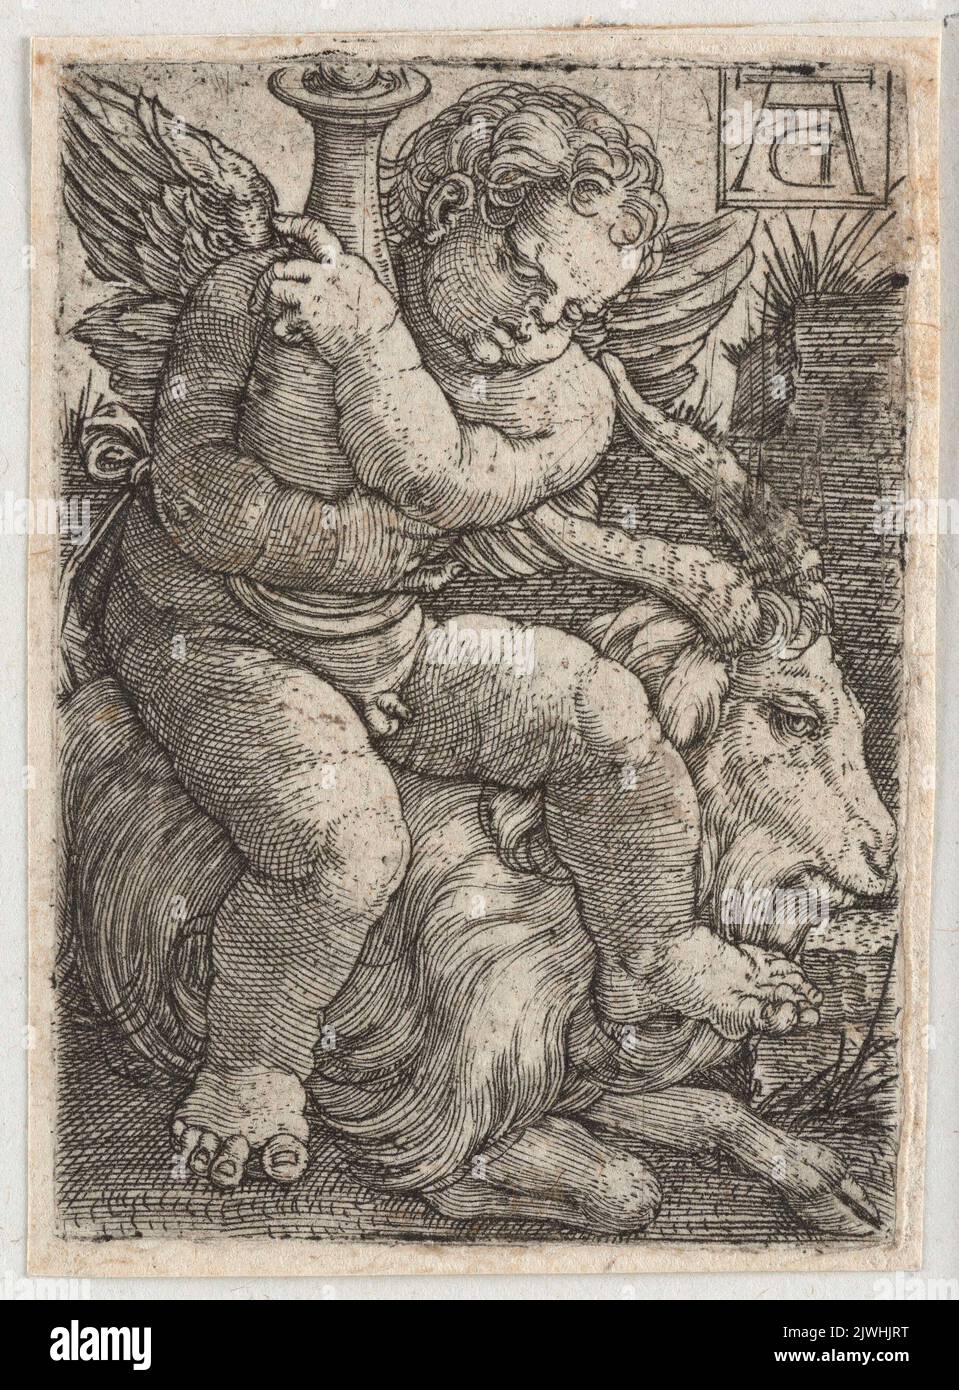 Putto with a Vase Sitting on a Goat. Aldegrever, Heinrich (1502-1555/1561) Stock Photo